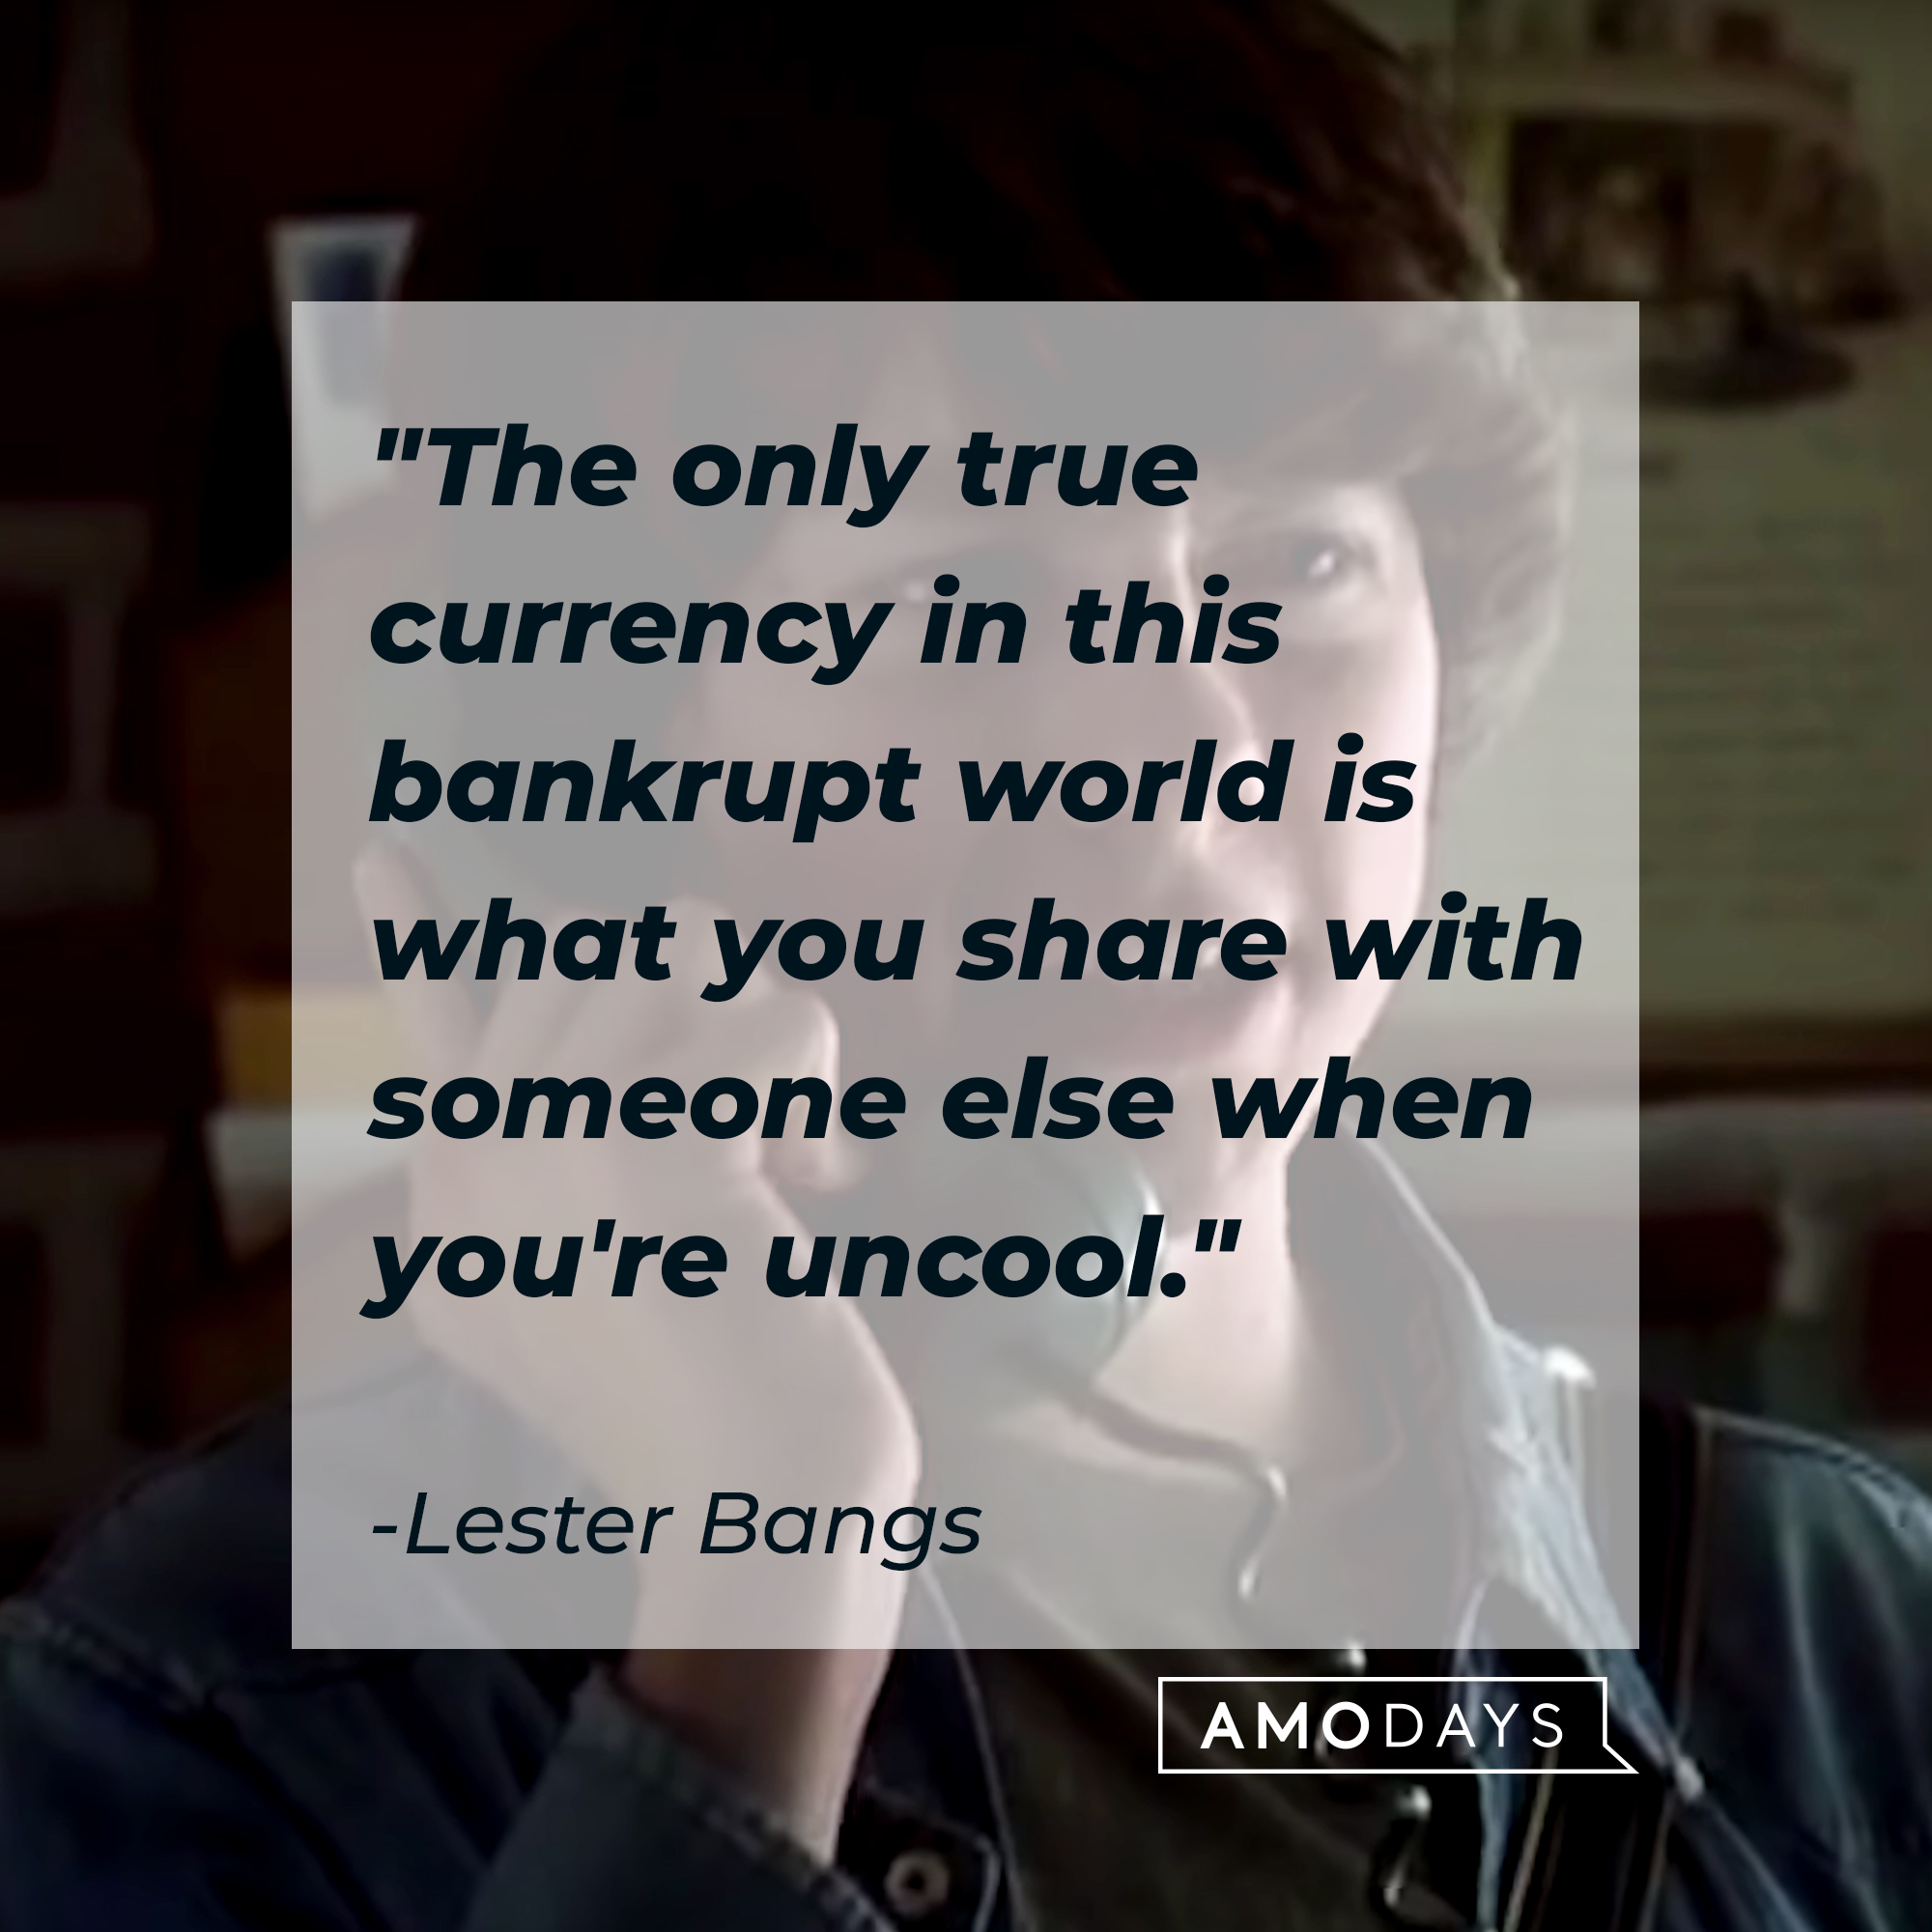 Lester Bang's quote: "The only true currency in this bankrupt world is what you share with someone else when you're uncool." | Source: Facebook/AlmostFamousTheMovie